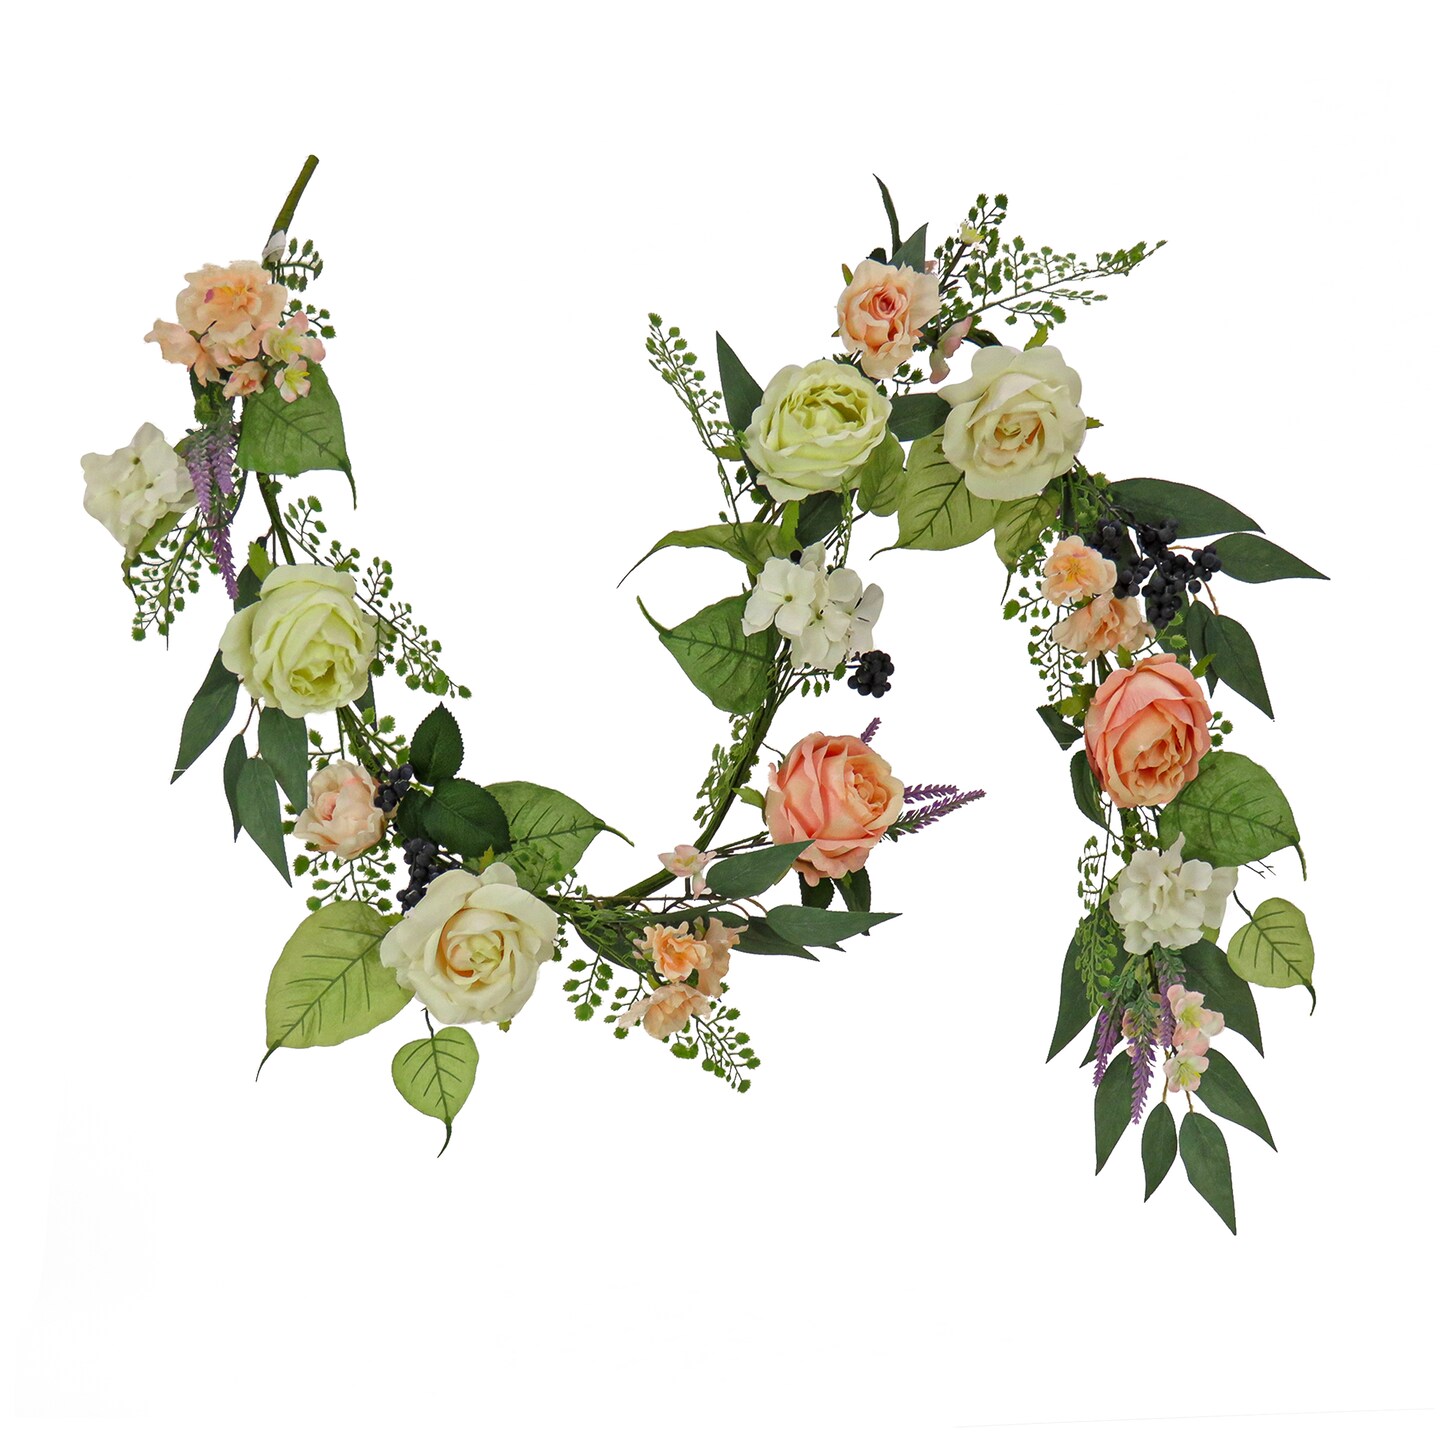 National Tree Company Artificial Spring Garland, Vine Stem Base, Decorated with Rose Blooms, Lavender, Berry Clusters, Leafy Greens, Spring Collection, 6 Feet